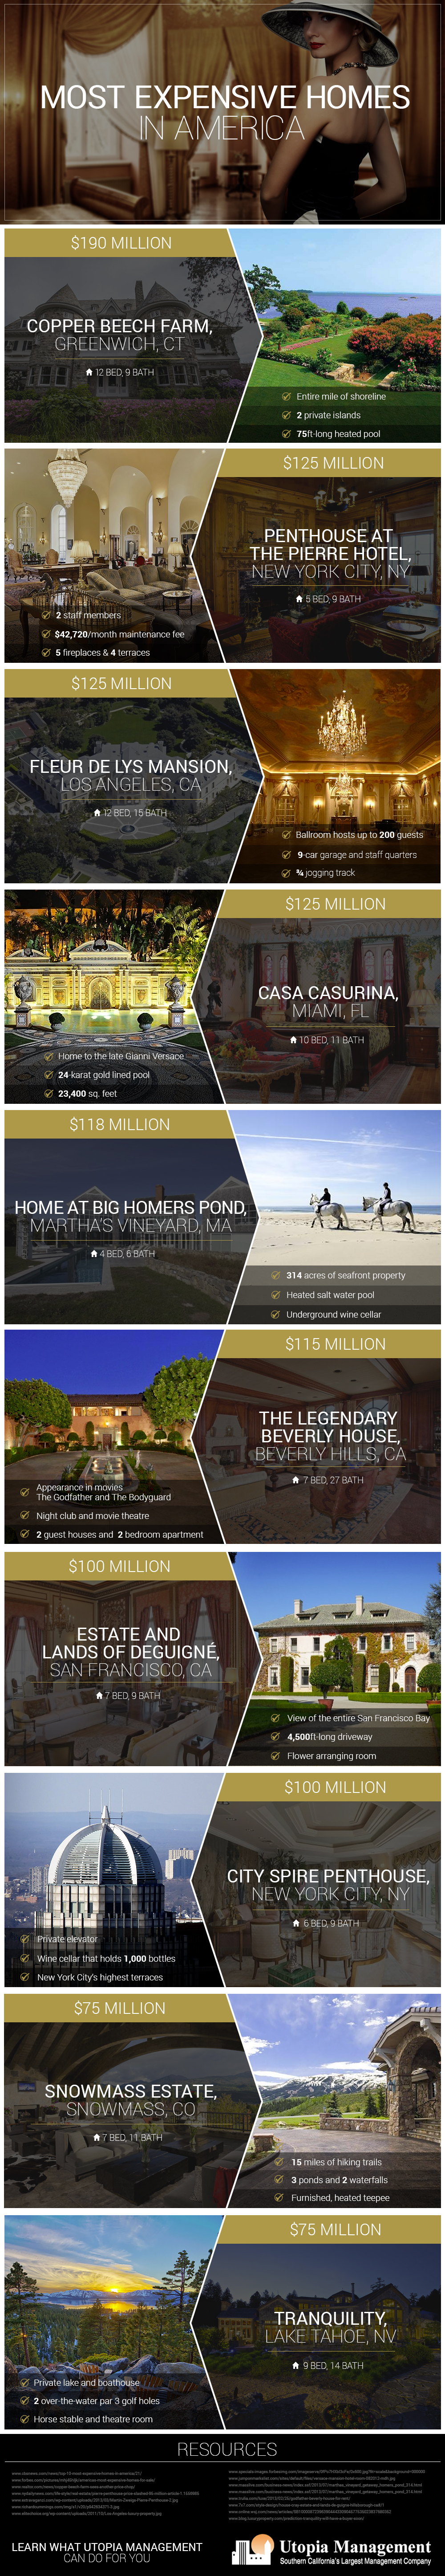 Most Expensive Homes in America